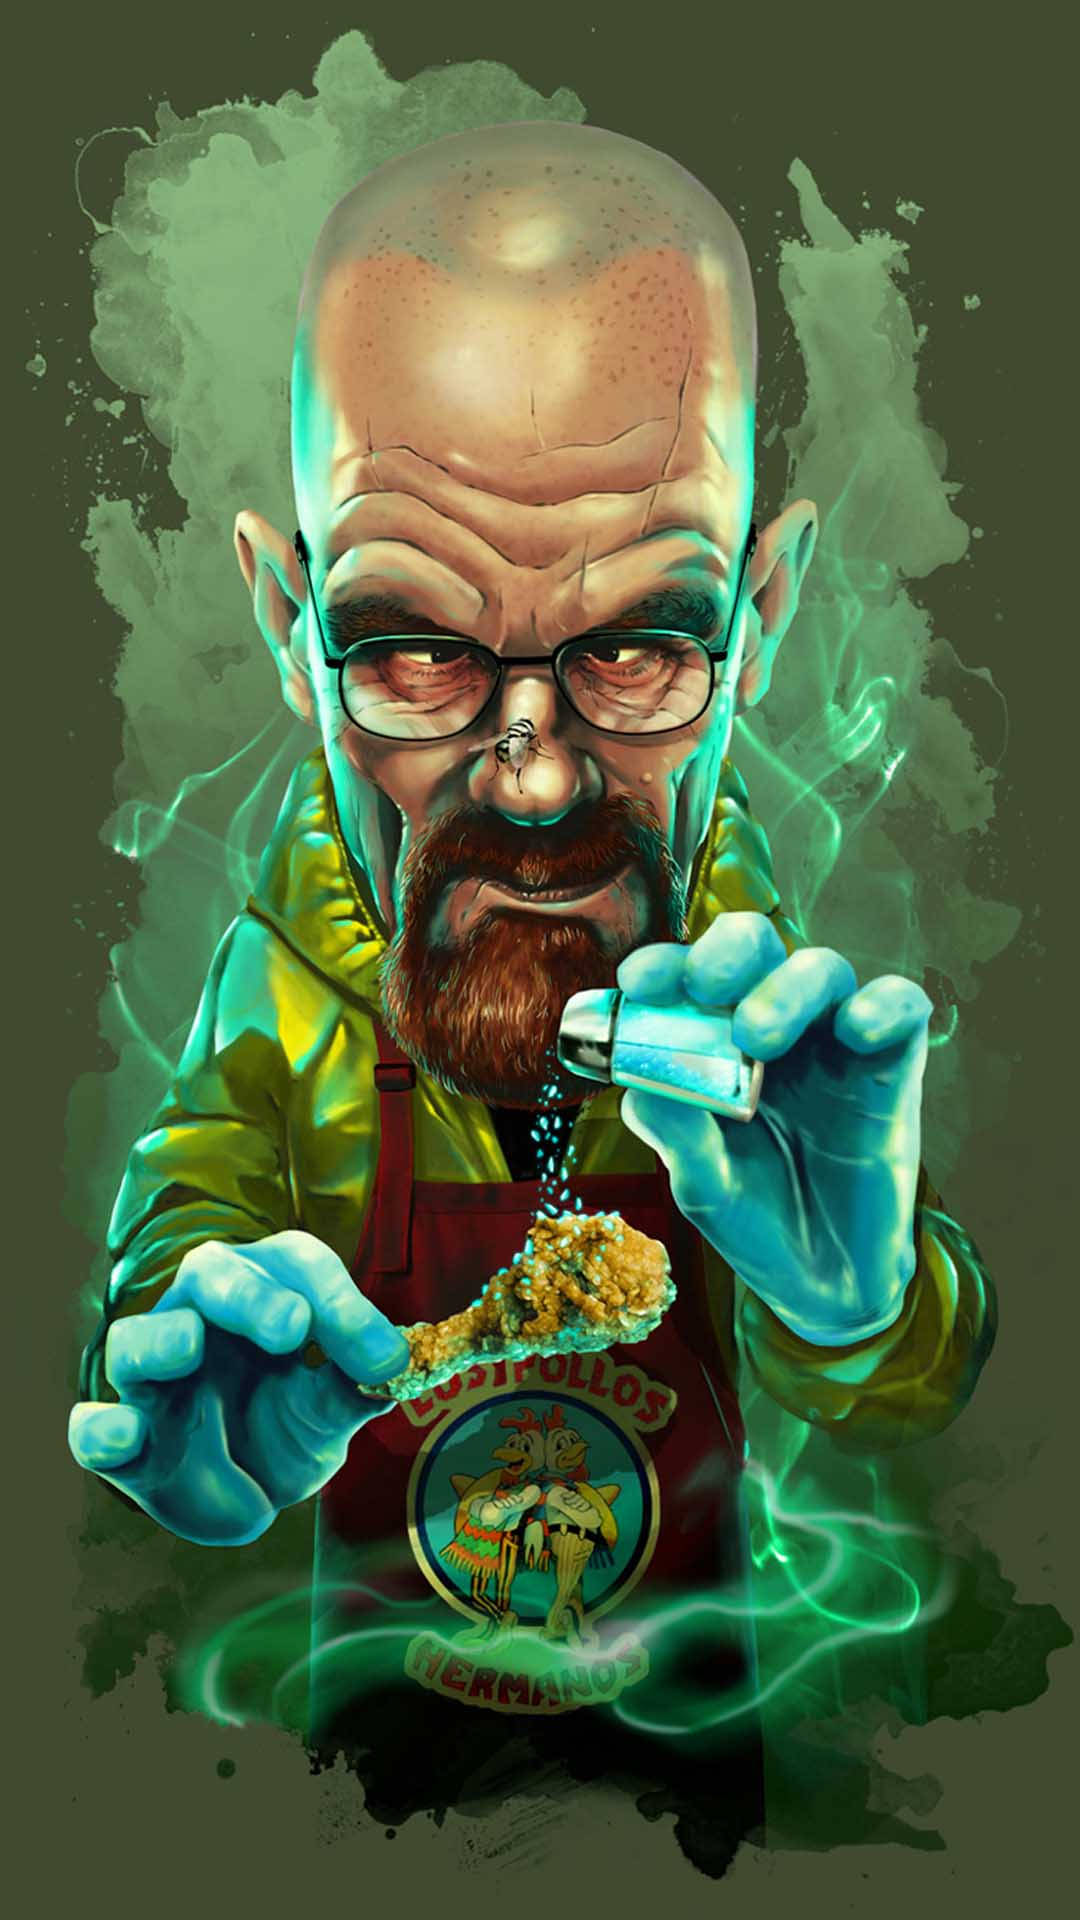 Breaking Bad's Walter White taking matters into his own hands Wallpaper